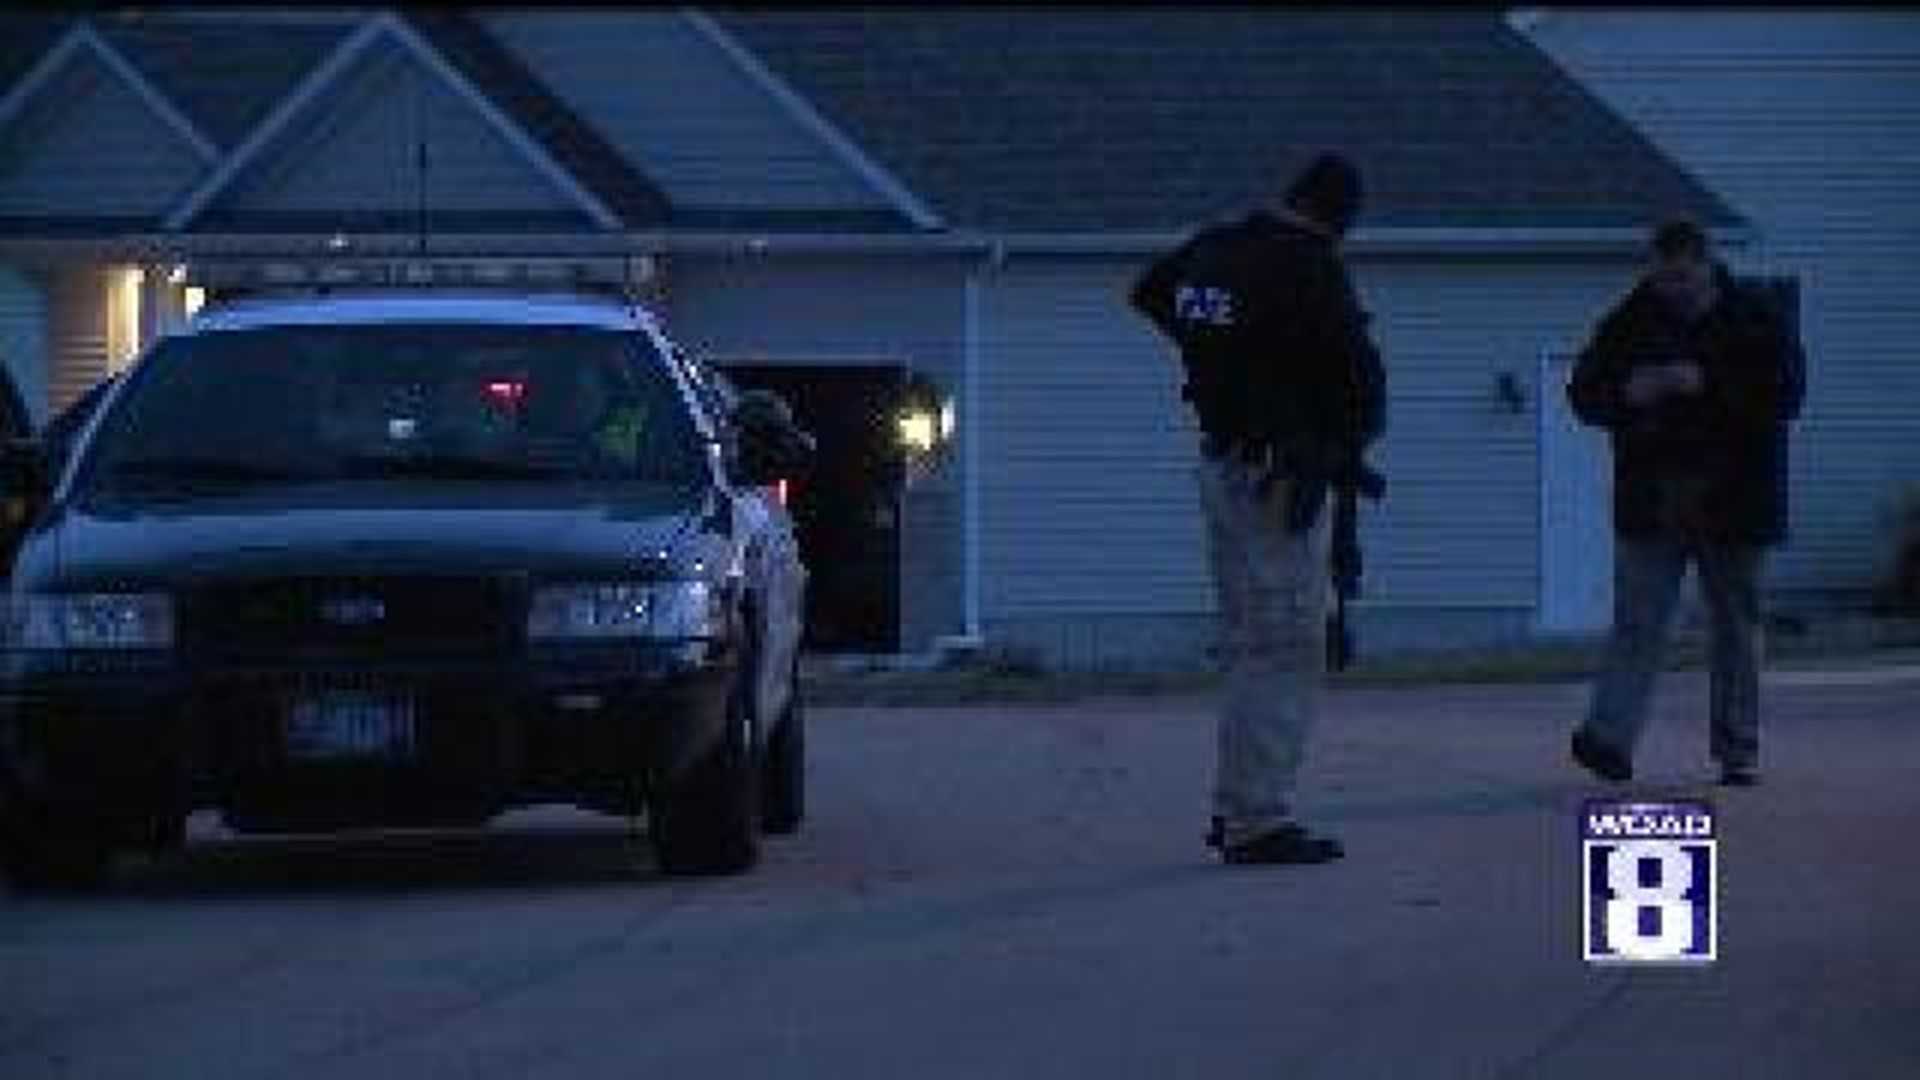 Police explain decisions behind ending Bettendorf standoff